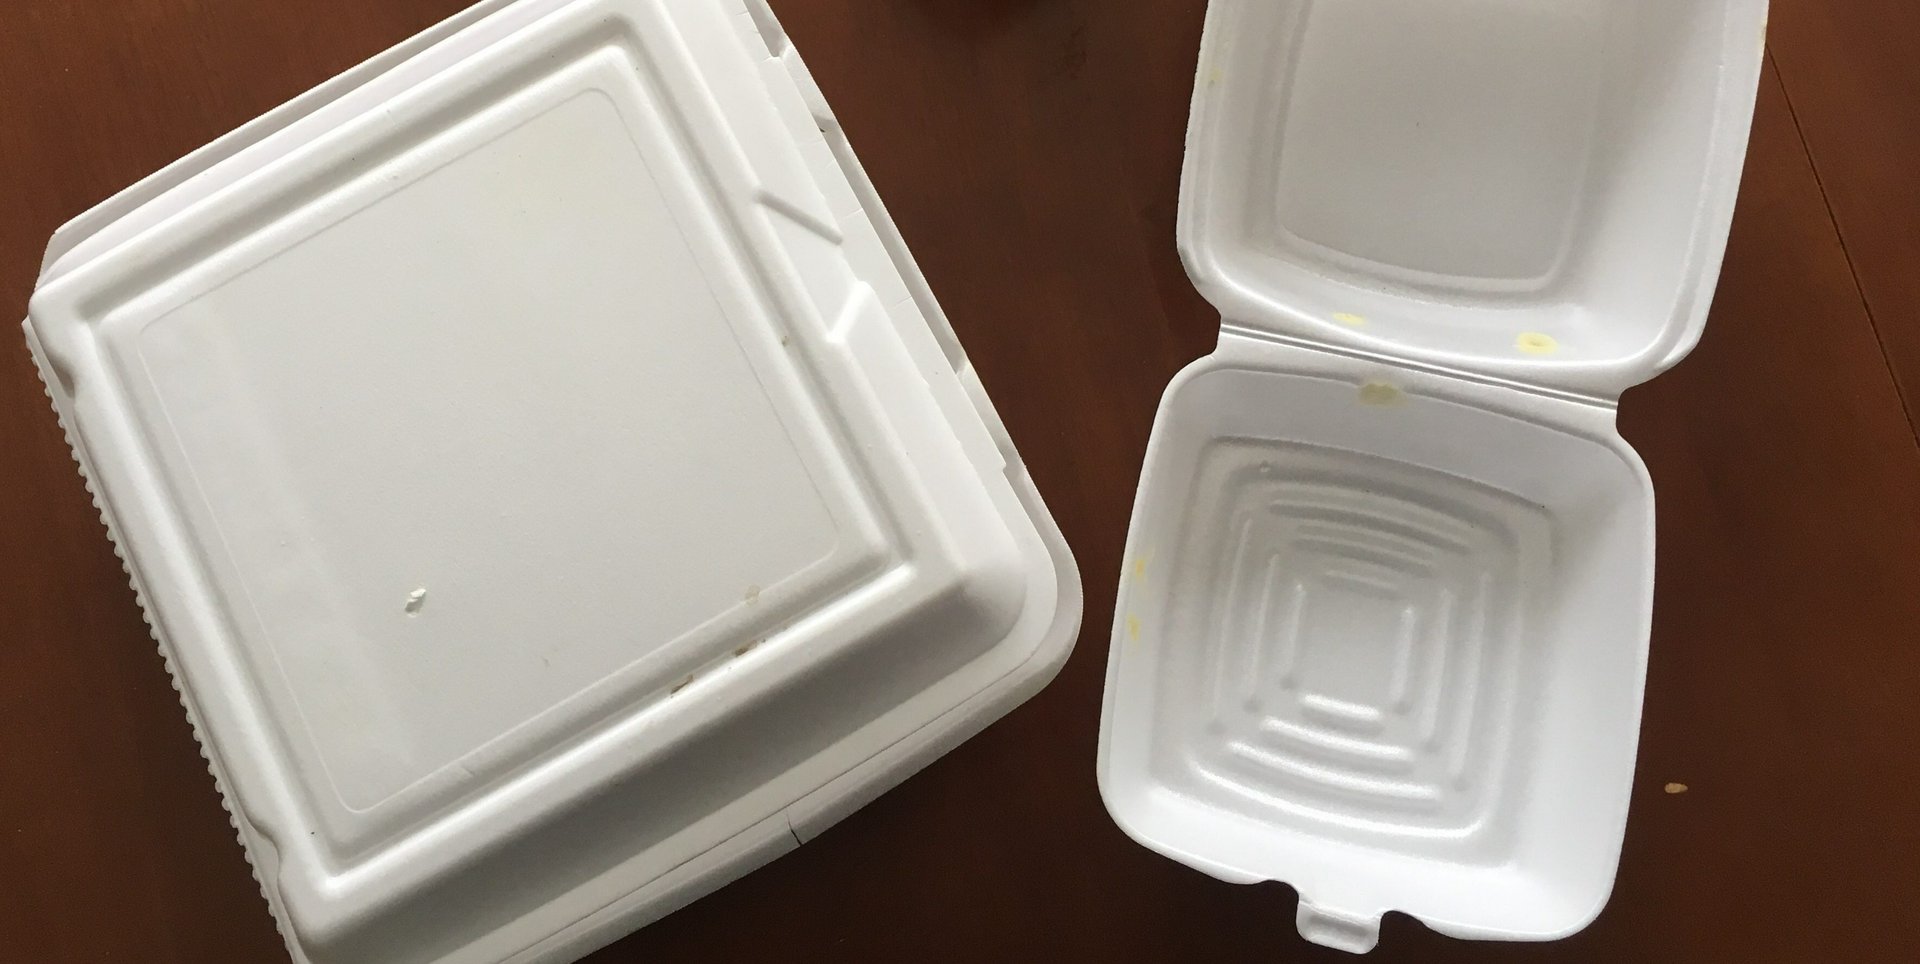 The real cost of Styrofoam shows more than meets the eye